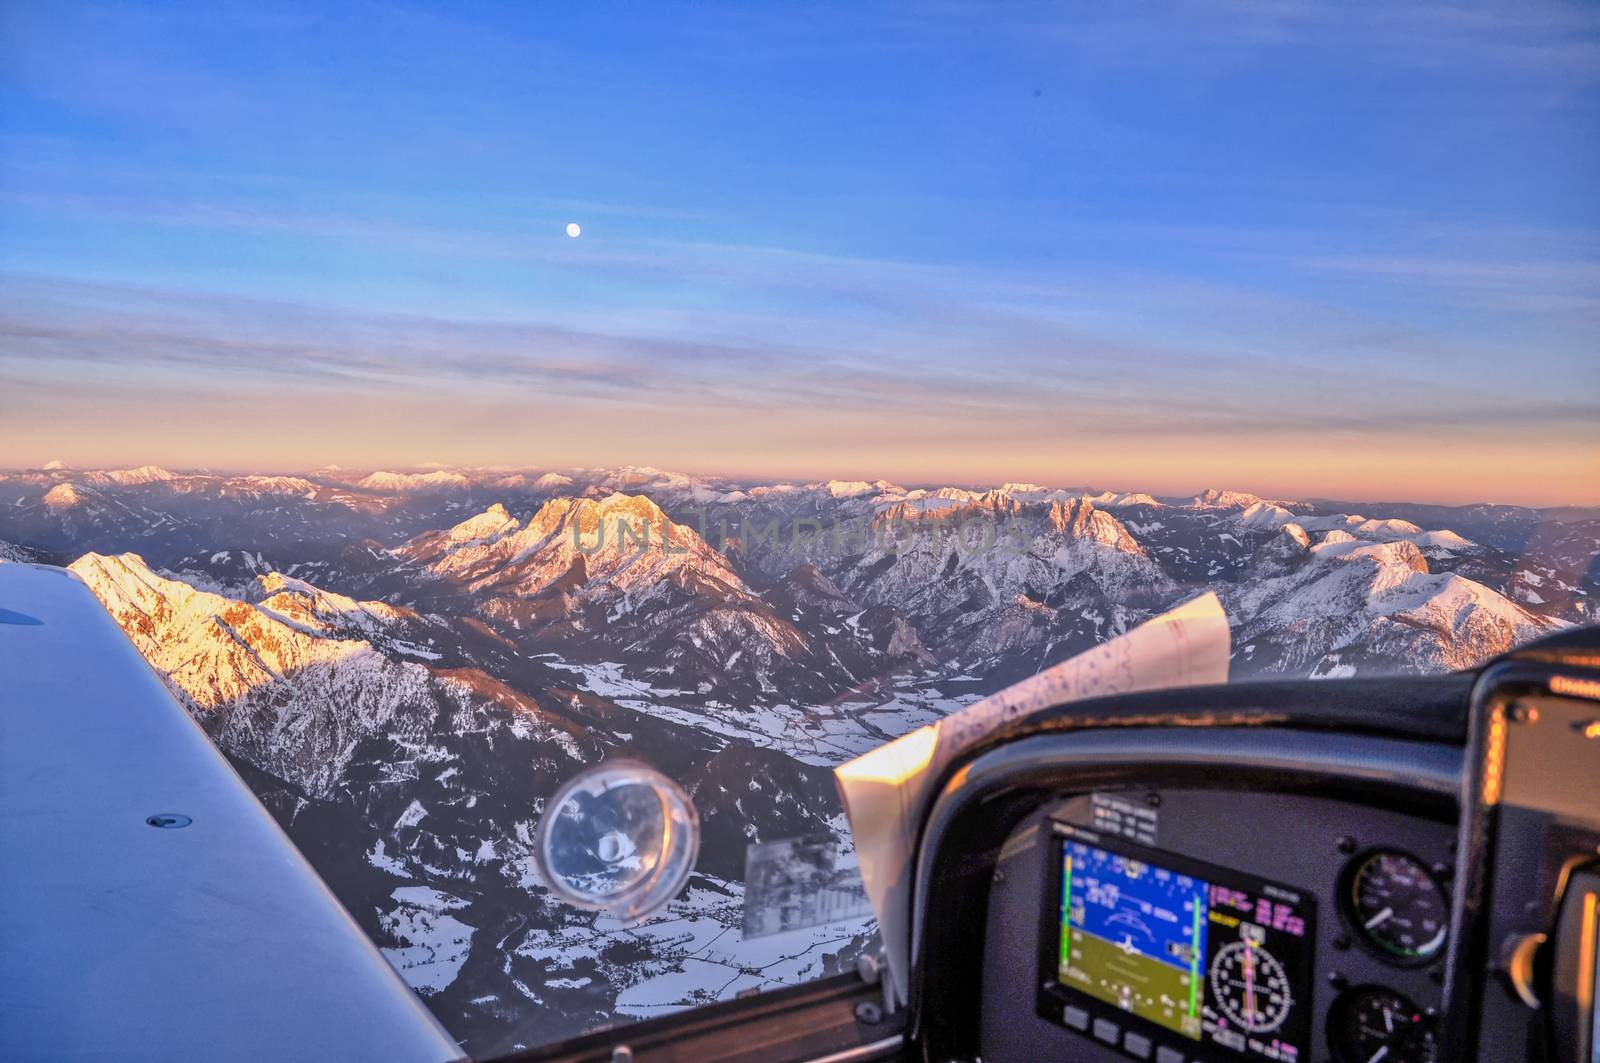 Light Sport Aircraft flying above Alpine peaks over Austria in sunset by asafaric